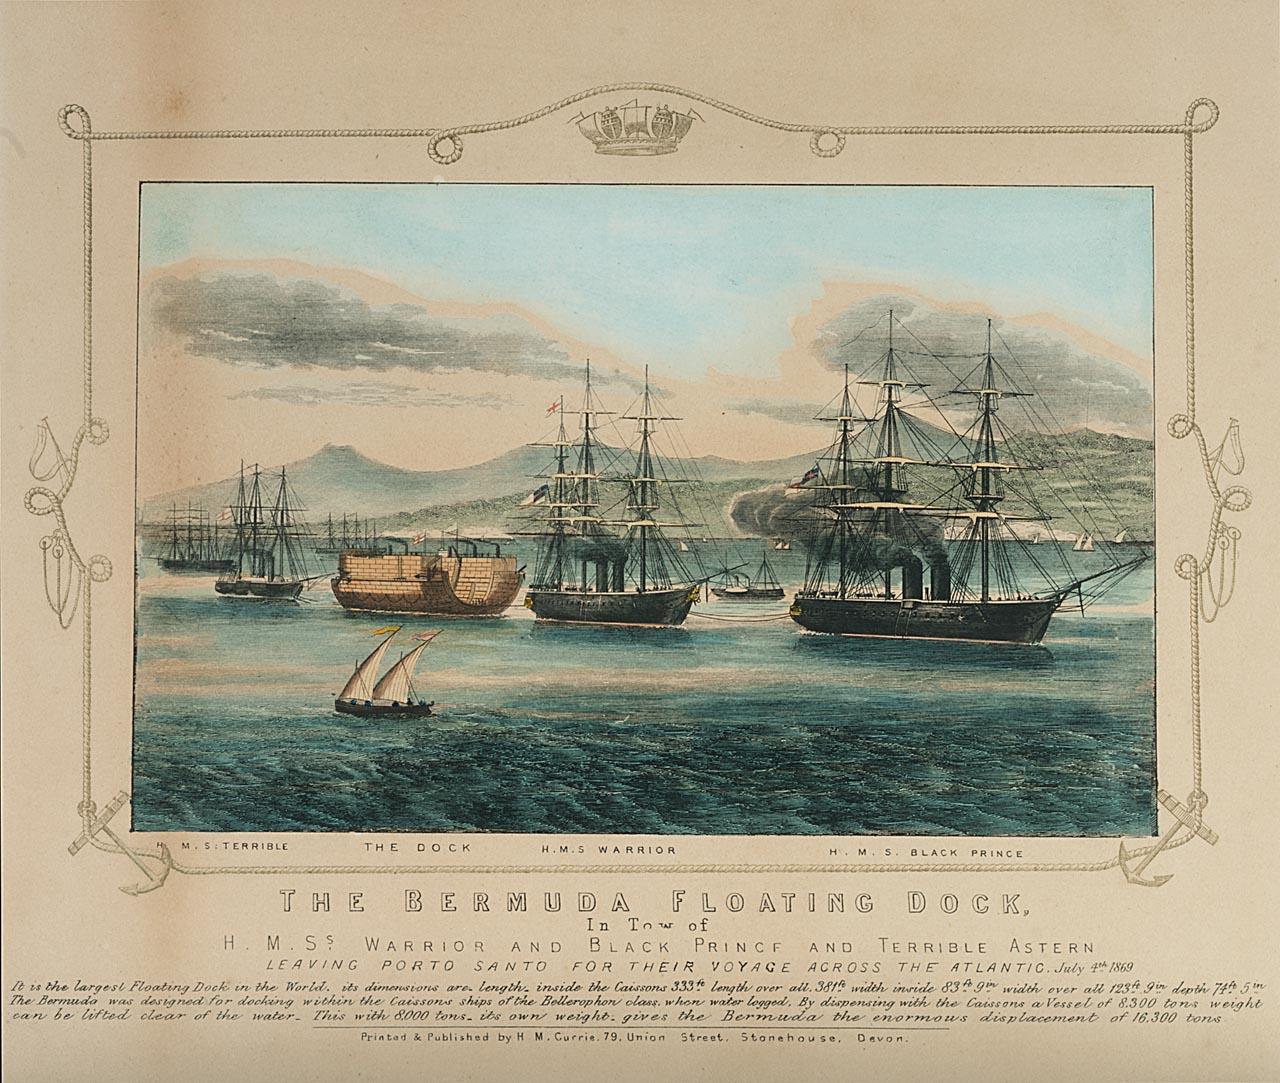 Coloured print showing the departure of the Bermuda floating dock from Porto Santo on 4 July 1869